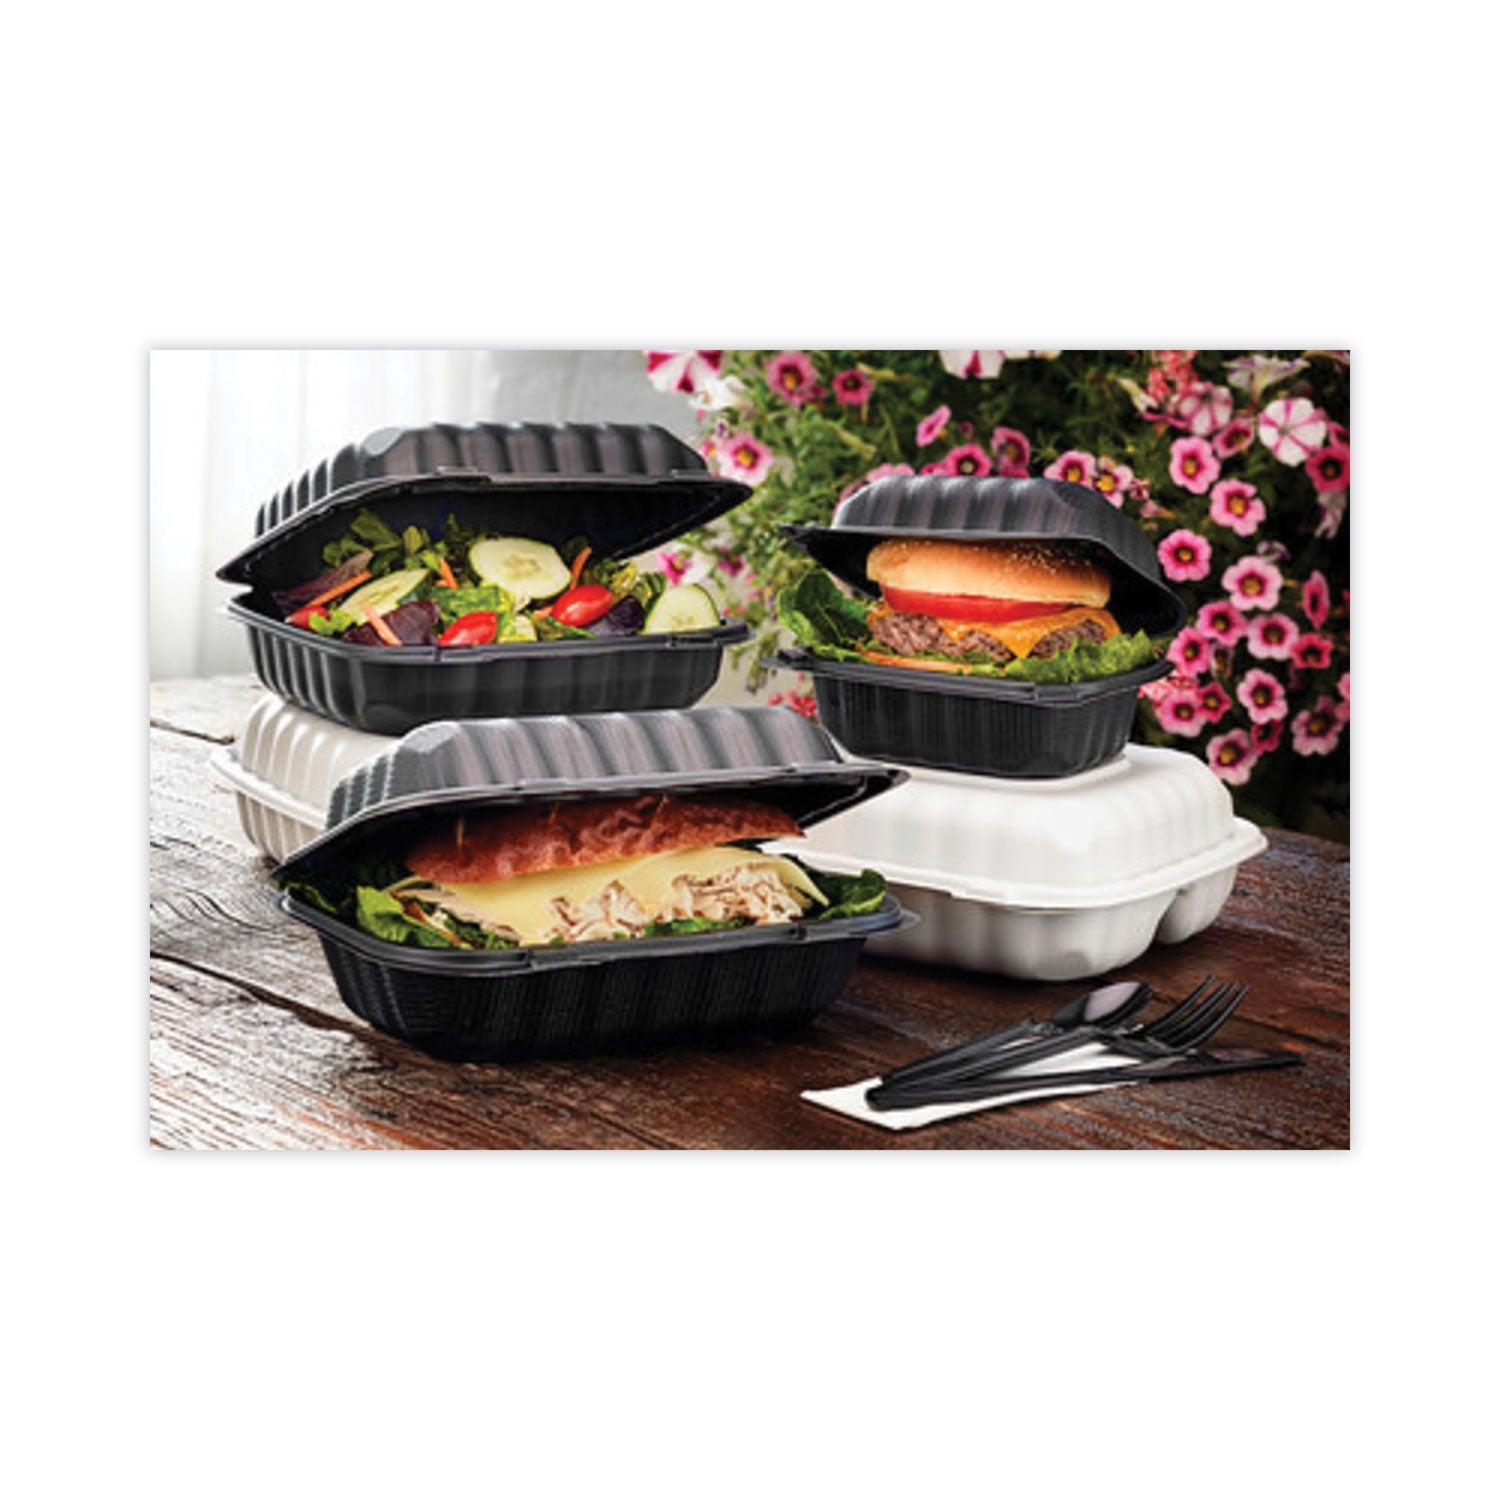 earthchoice-smartlock-microwavable-mfpp-hinged-lid-container-831-x-835-x-31-black-plastic-200-carton_pctycnb08010000 - 6